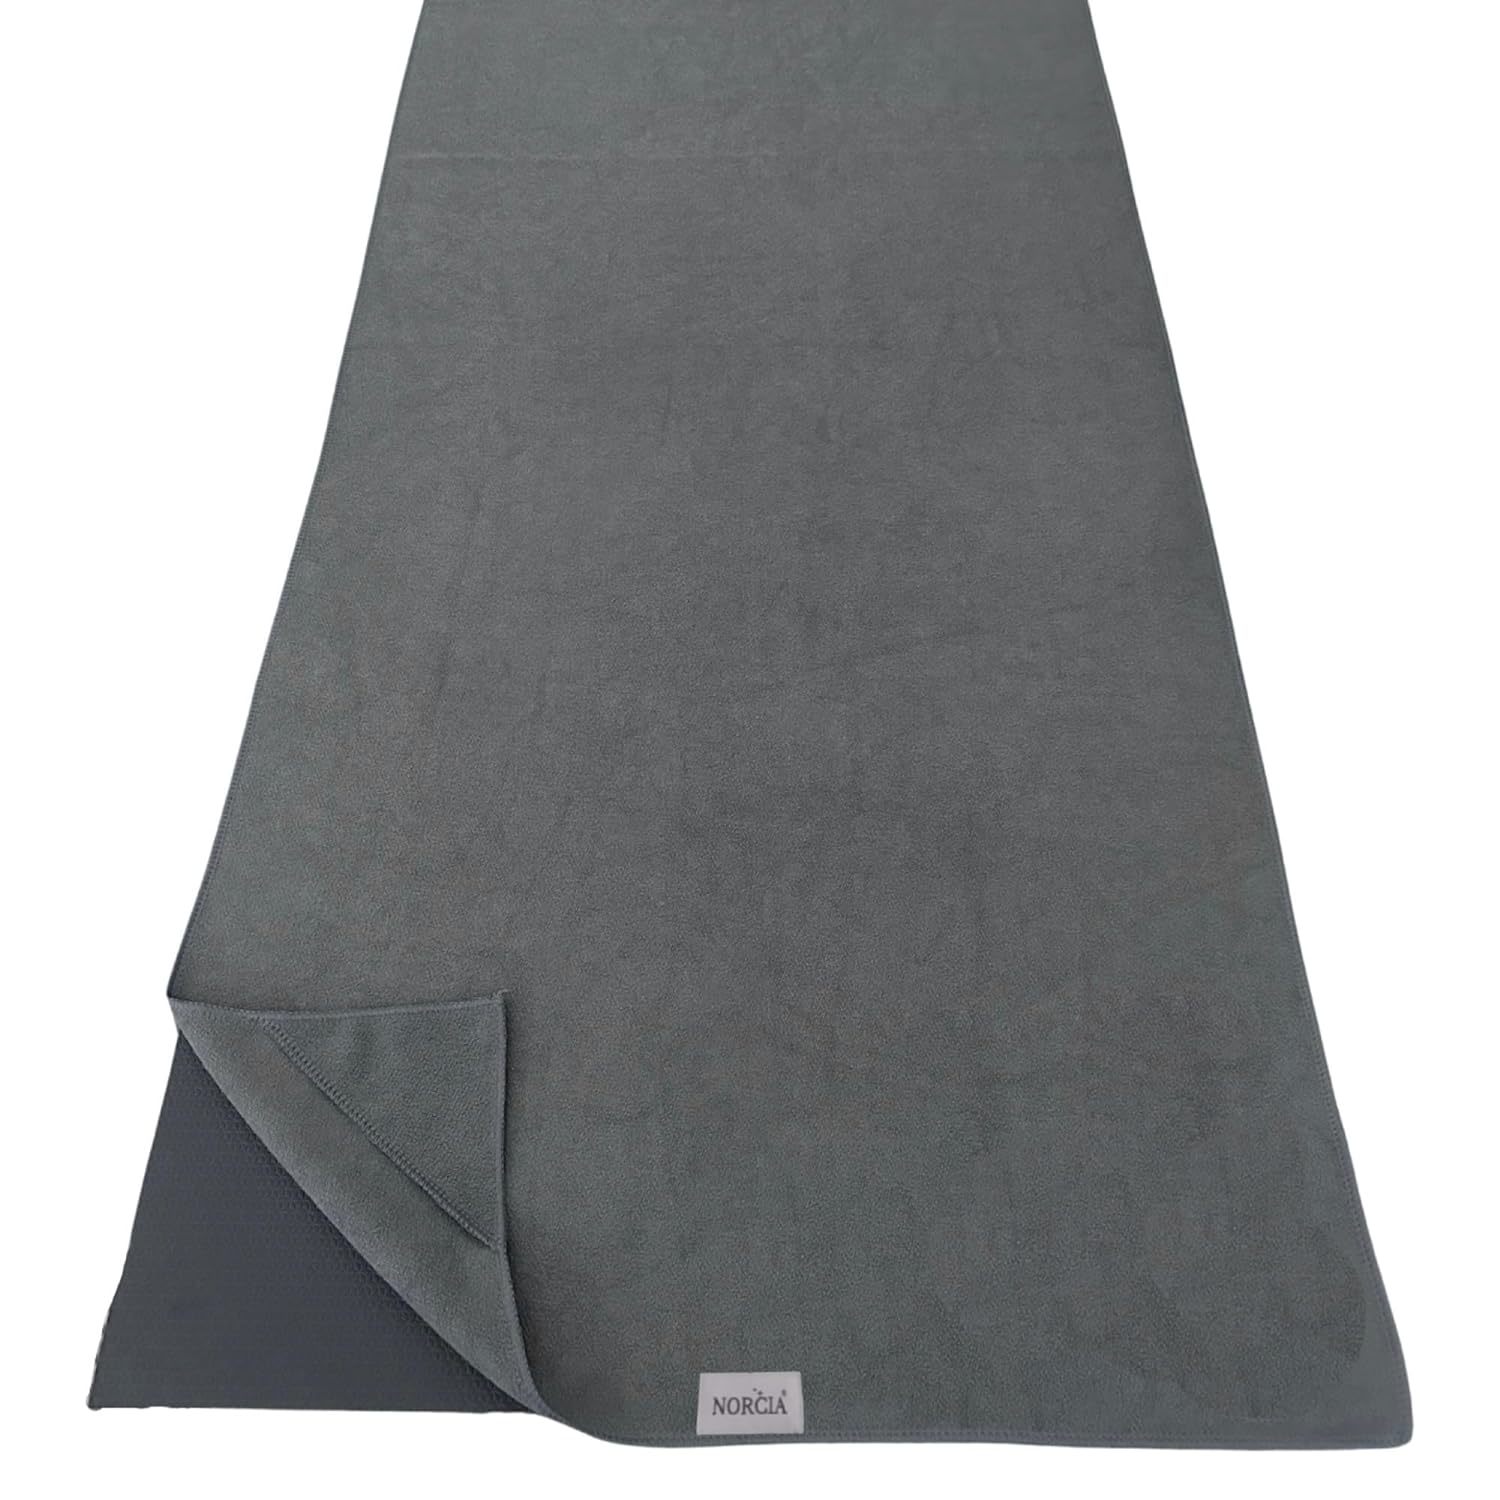 Primary image for , Yoga Towel, Non Slip Hot Yoga Mat Towel With Corner Pockets, Mat-Sized 24"X72"